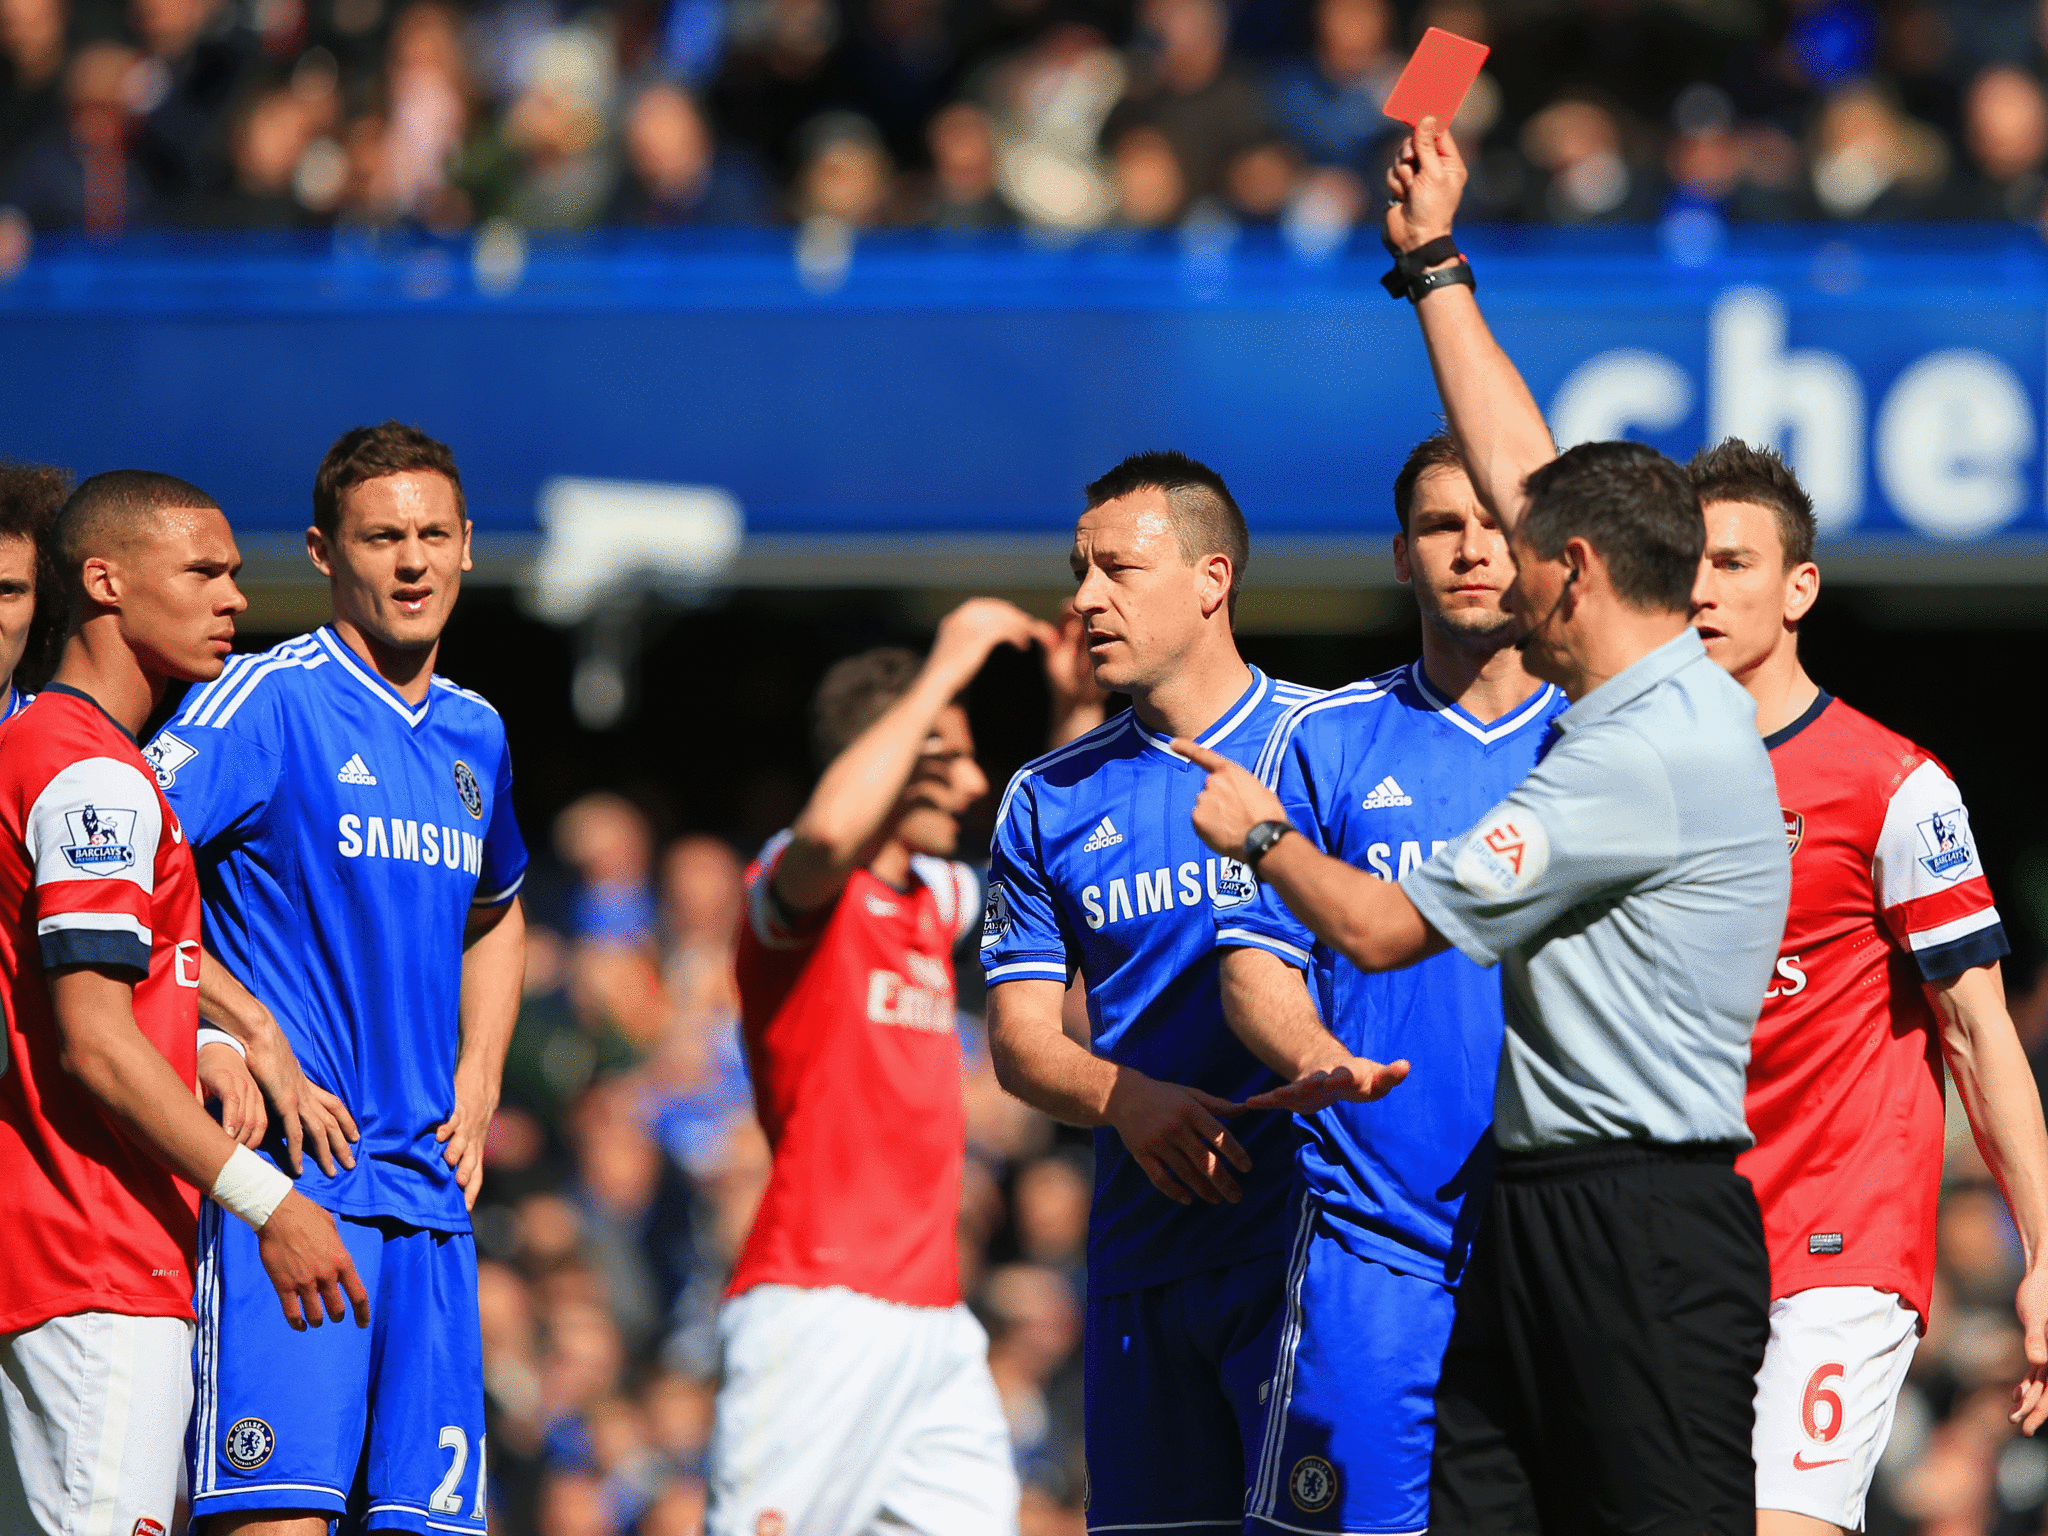 Kieran Gibbs is mistakenly dismissed by referee Andre Marriner in Arsenal's 6-0 defeat to Chelsea